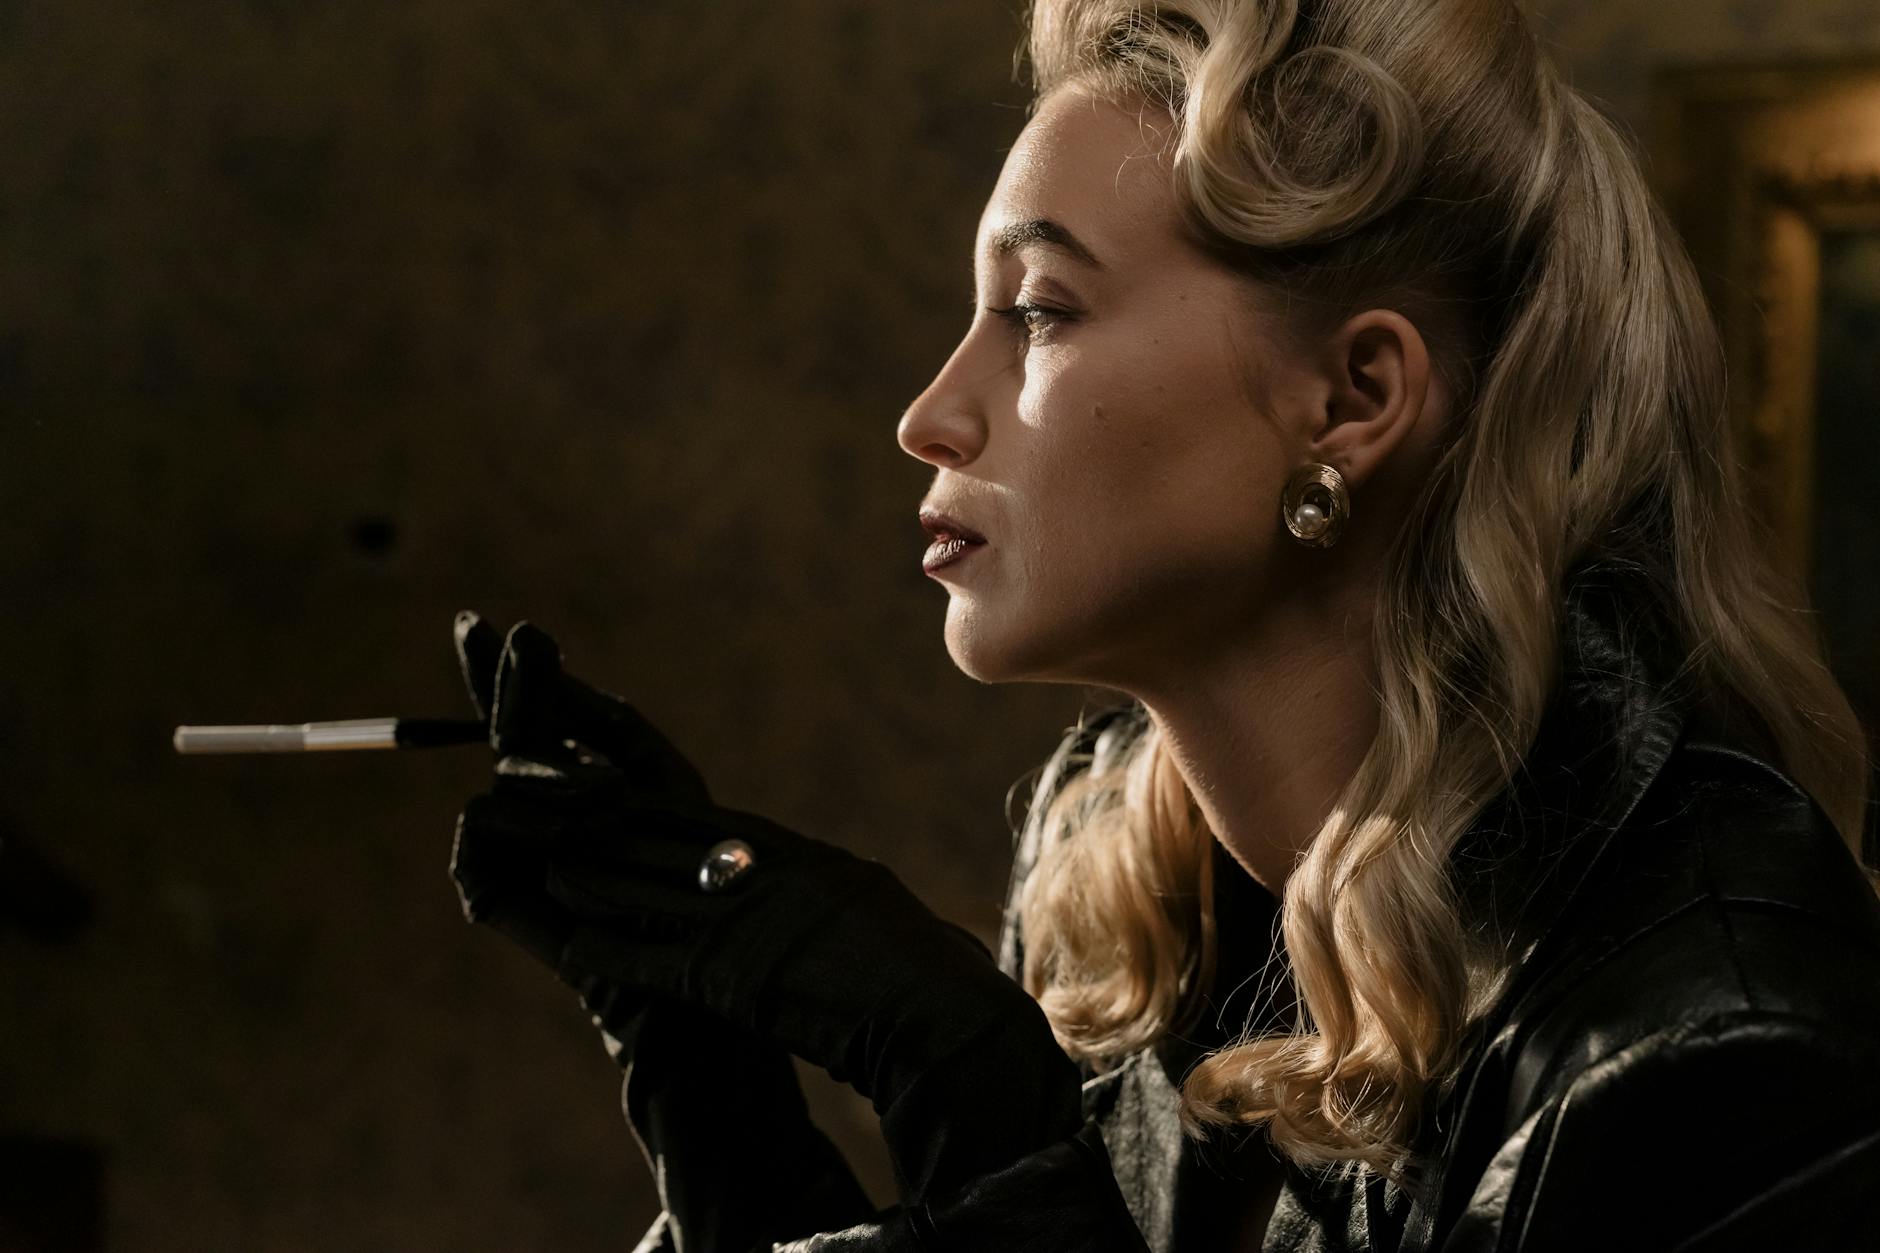 Side View Of Blonde Woman in Black Leather Jacket Holding A Cigarette